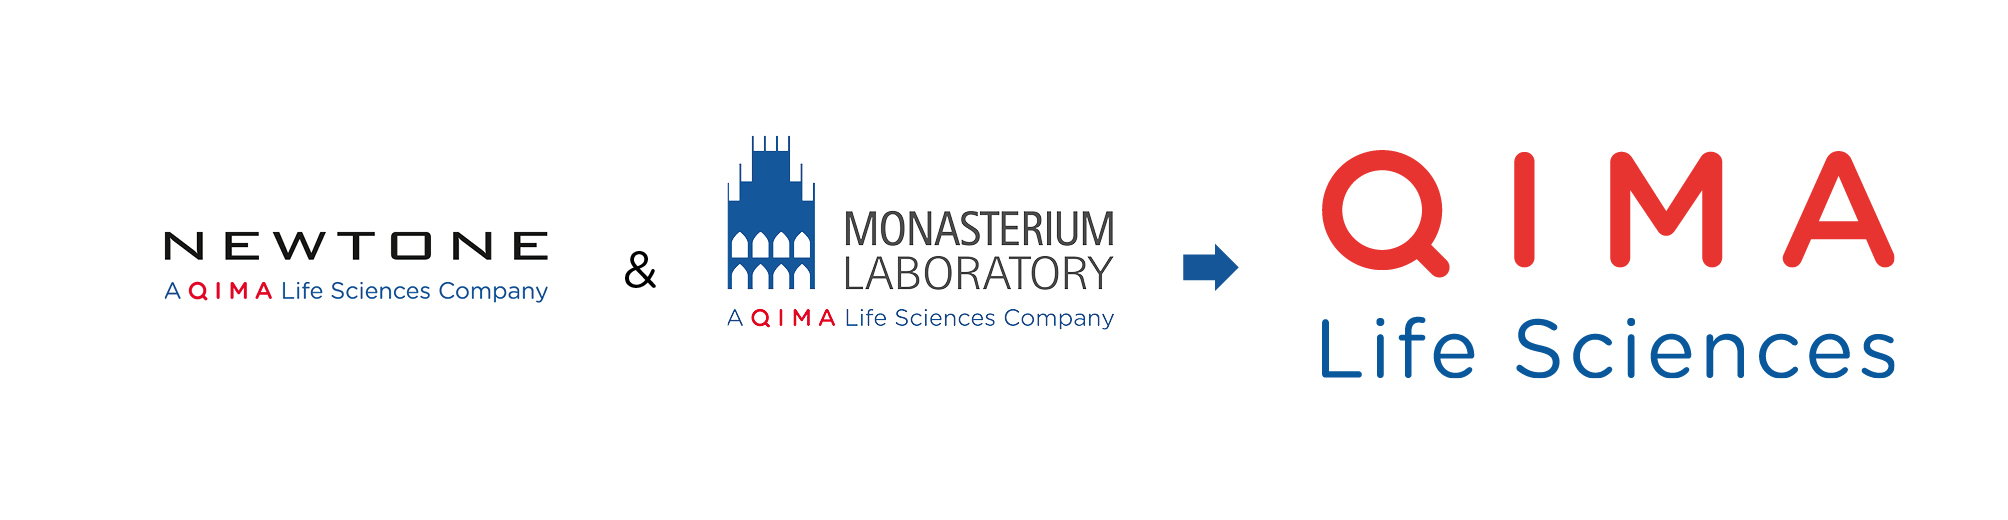 Newtone and Monasterium Laboratory are going to become QIMA Life Sciences